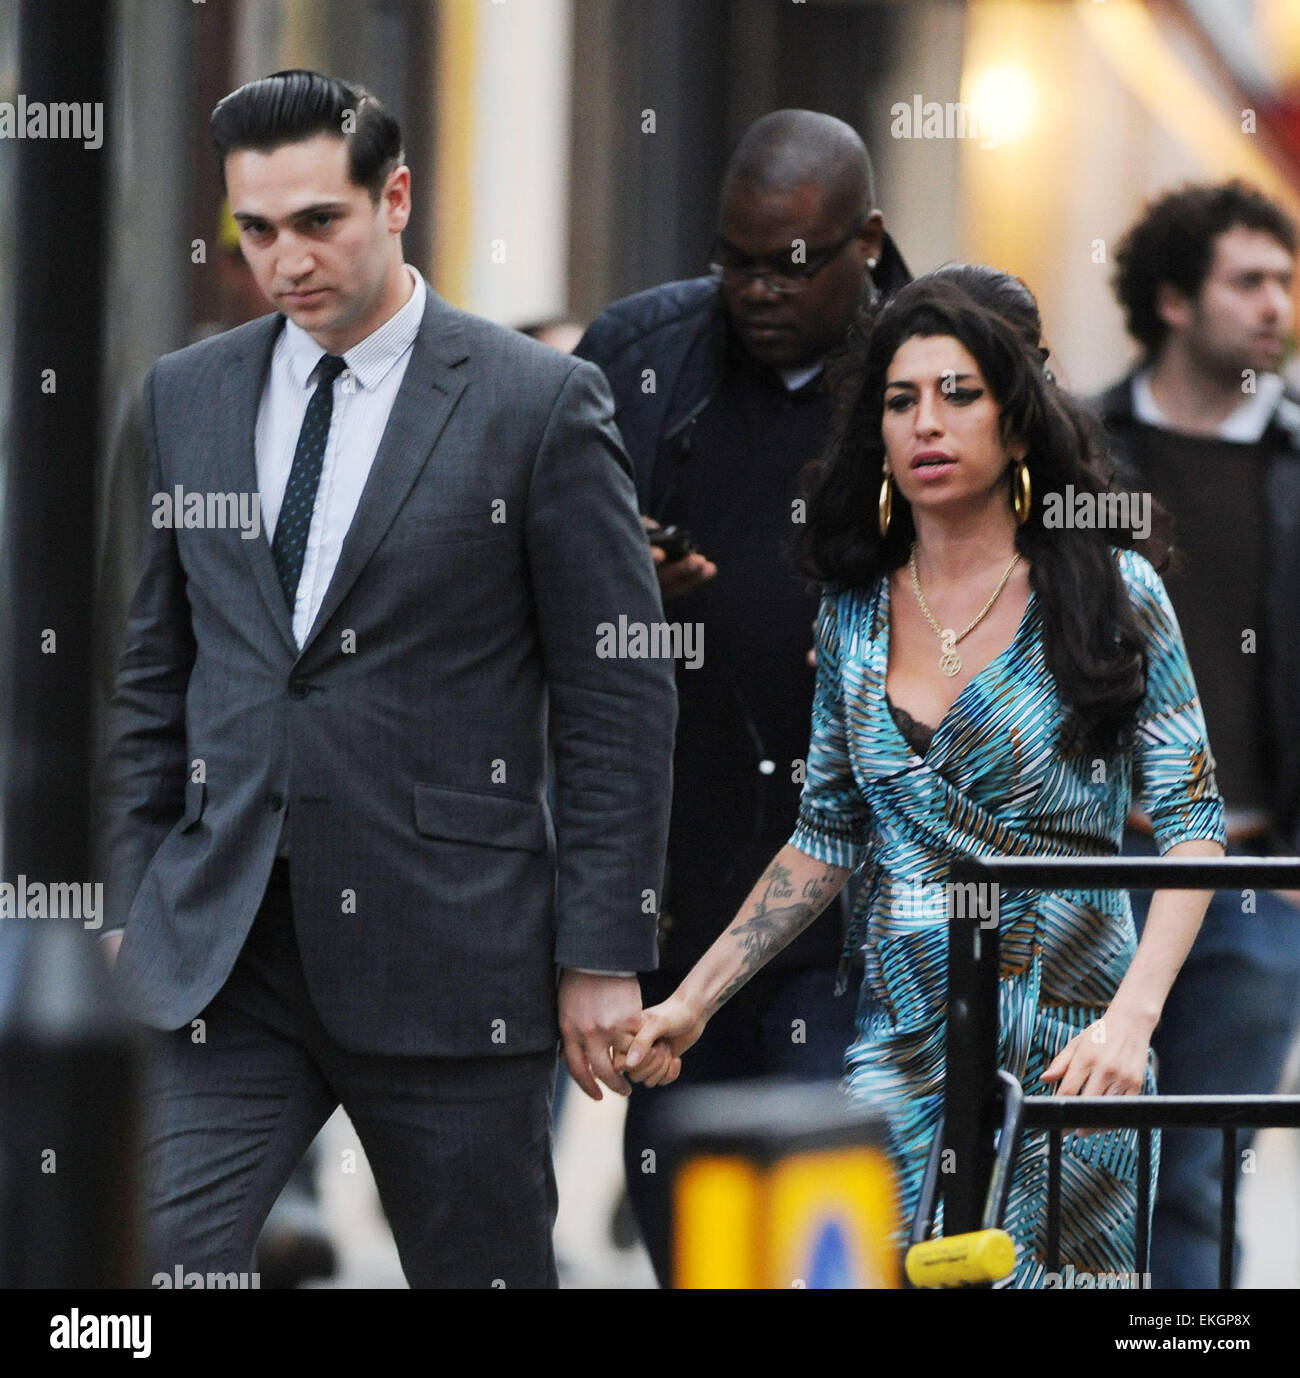 Amy Winehouse Proves Once And For All That Her Marriage To Blake Fielder Civil Is Finally Over As Her And Her New Man British Film Director Reg Traviss Step Out For The First